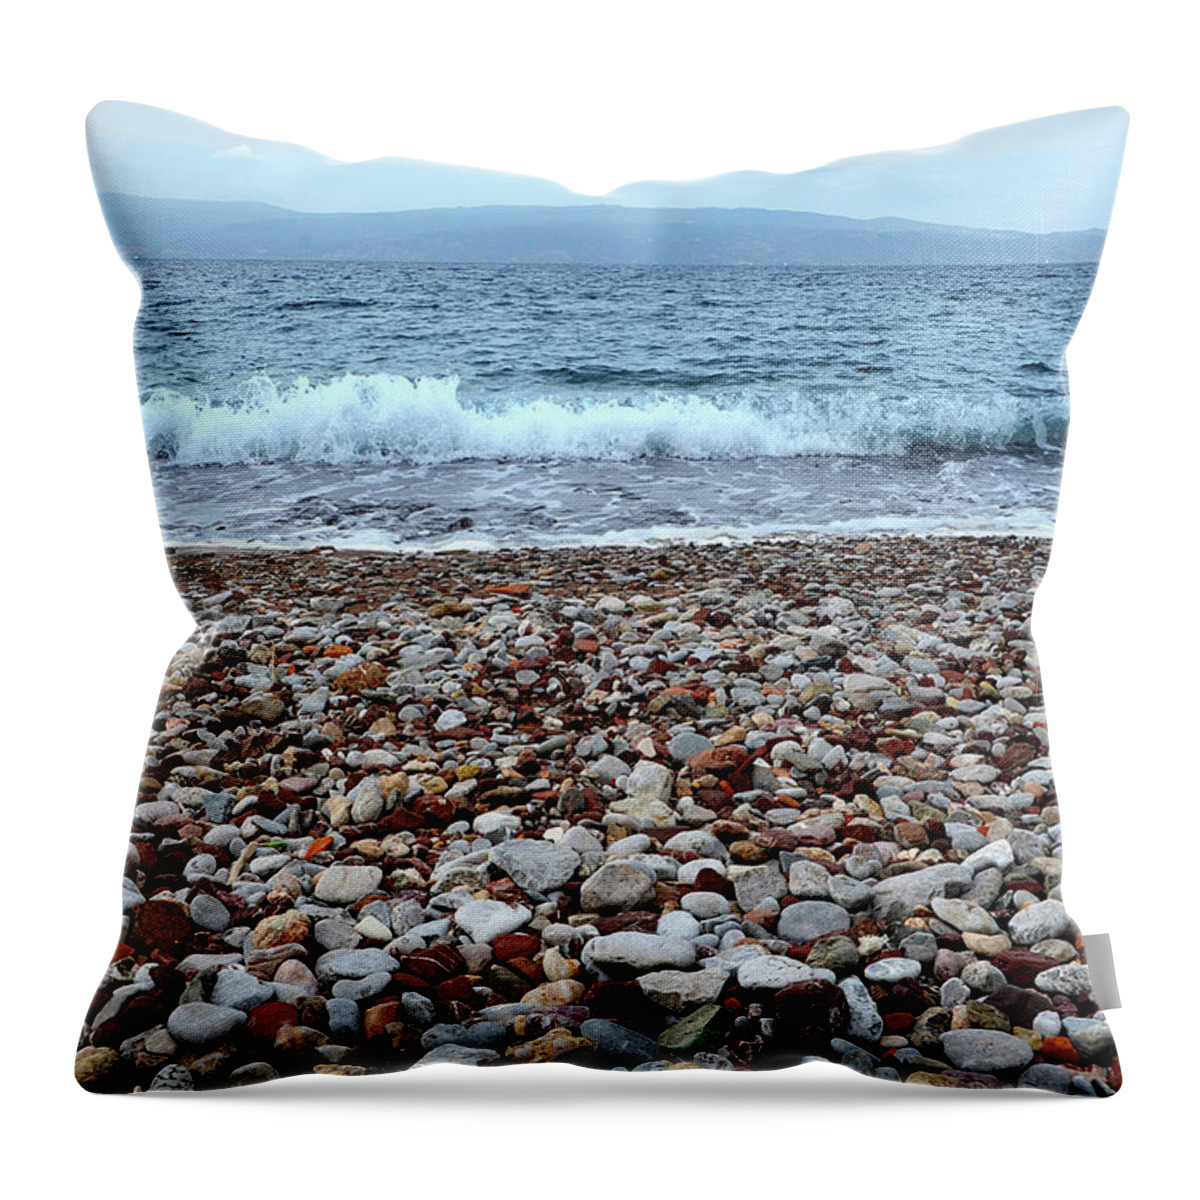 Water's Edge Throw Pillow featuring the photograph Beach Pebbles In Hydra Greece, Aegean by © Karolos Trivizas